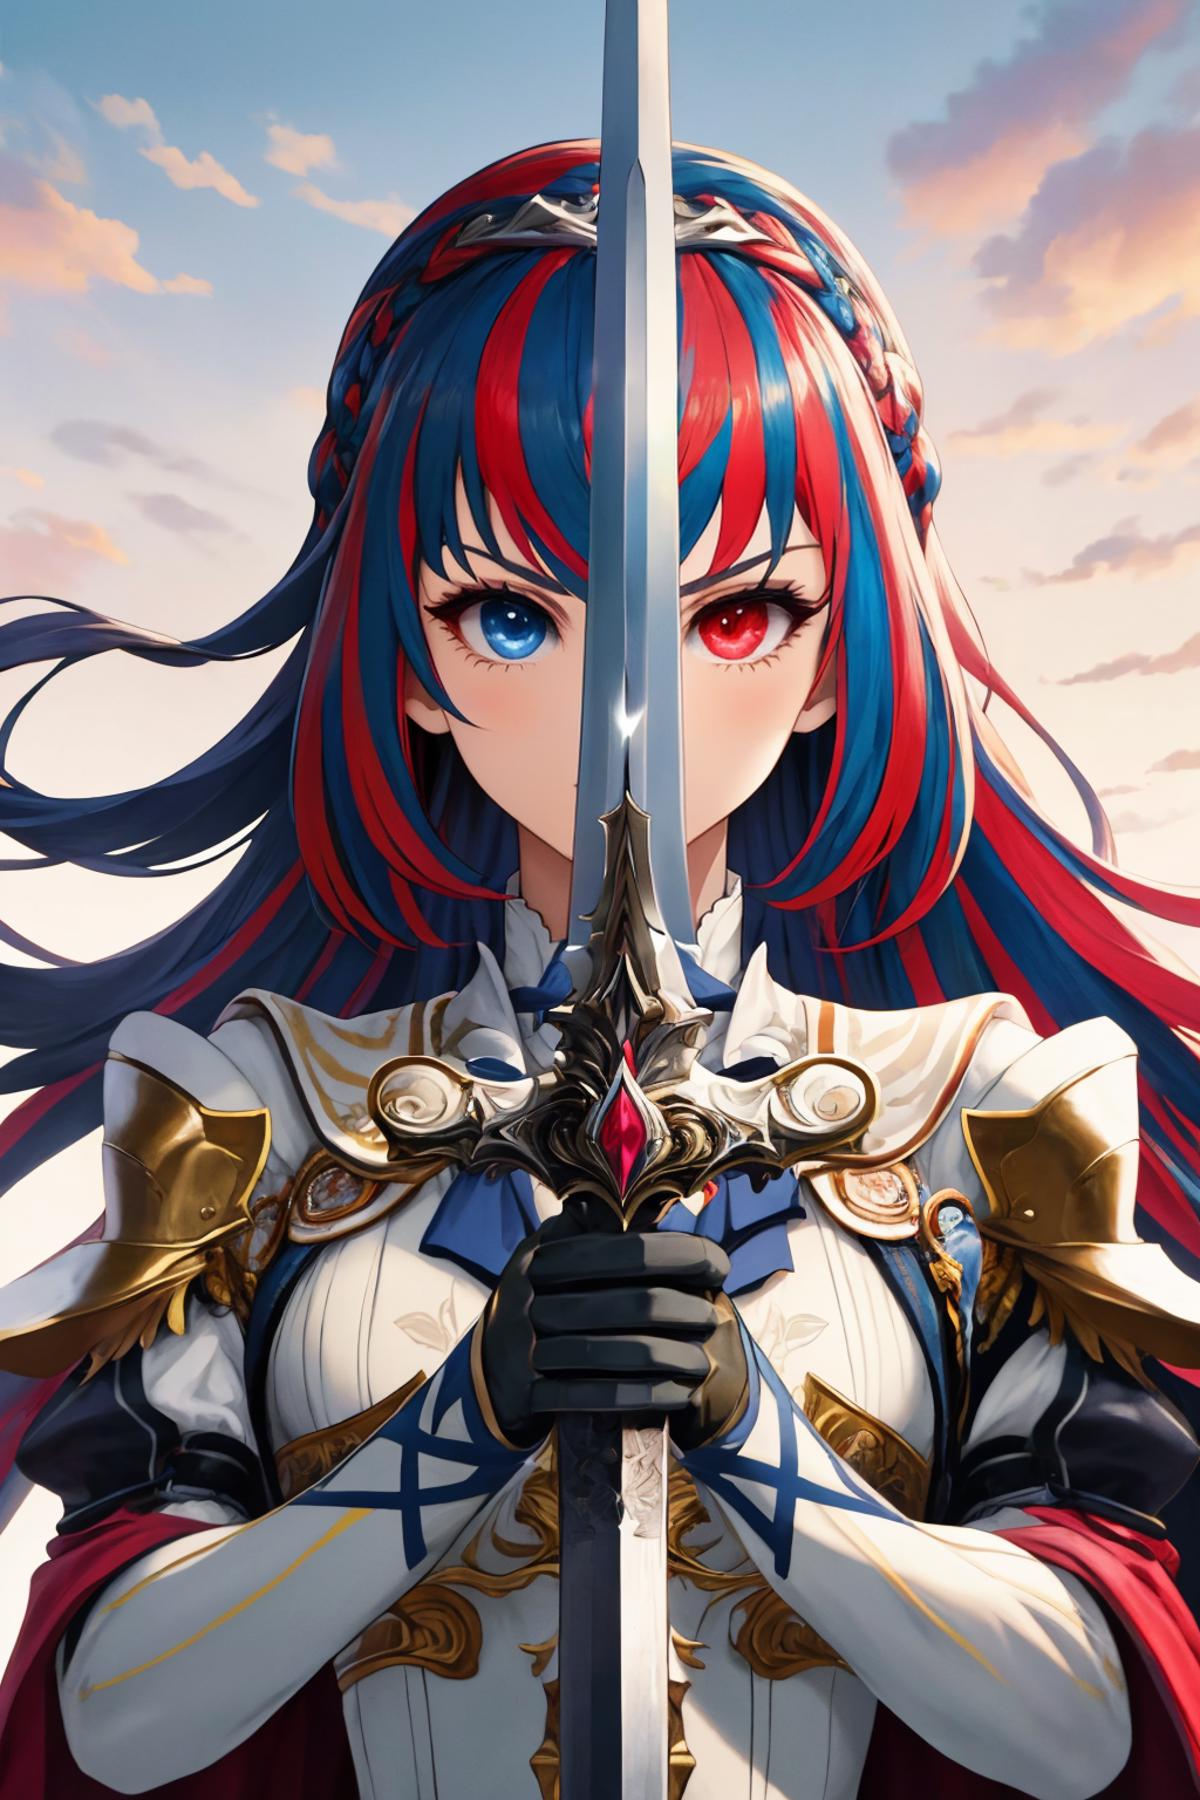 Anime character with blue eyes and red hair holding a sword.